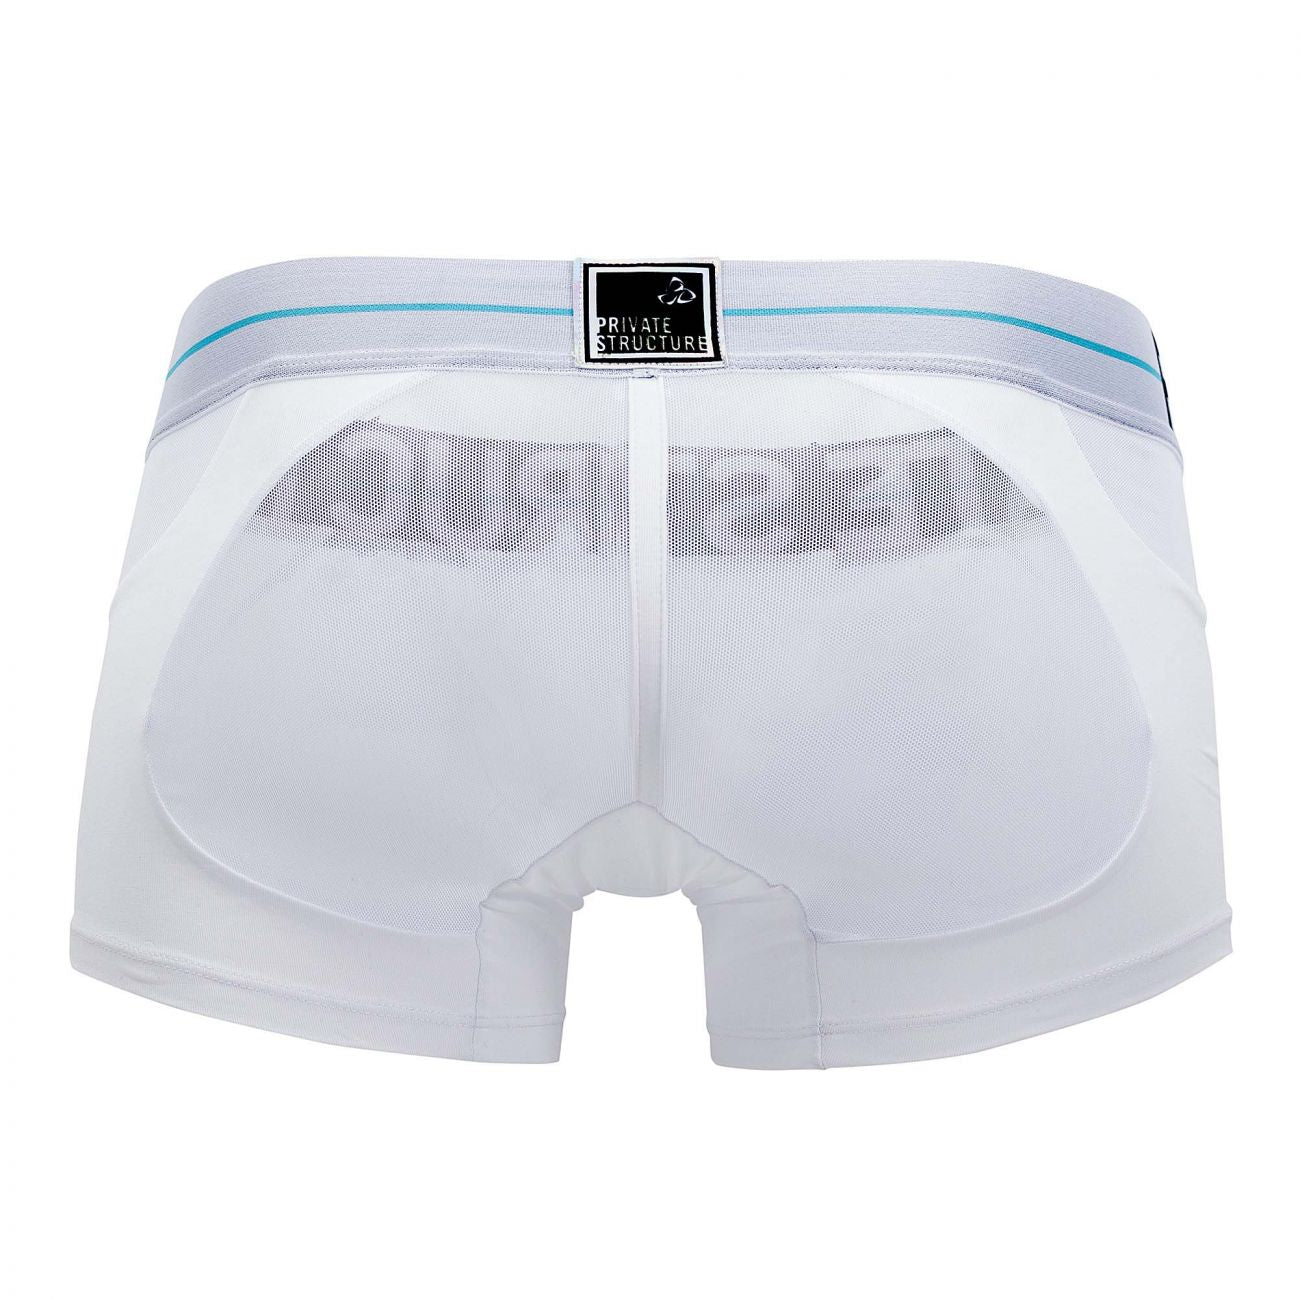 Private Structure MIUY3860 Momentum Trunks White